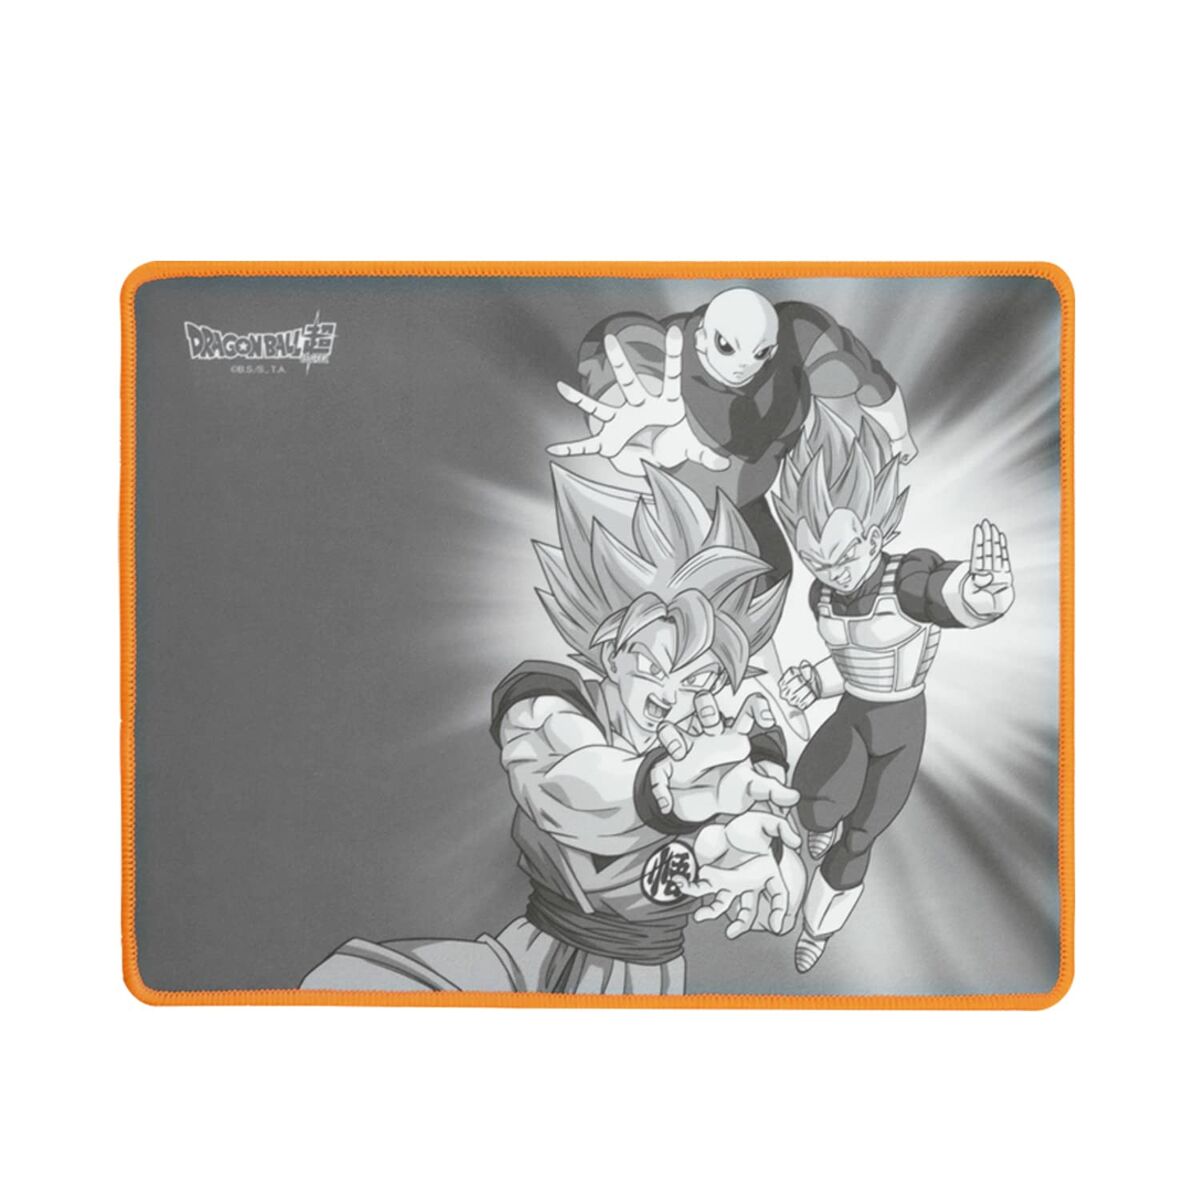 Pack Gaming FR-TEC Dragon Ball Spanish Qwerty, FR-TEC, Computing, Accessories, pack-gaming-fr-tec-dragon-ball-spanish-qwerty, :QWERTY, :Spanish, Brand_FR-TEC, category-reference-2609, category-reference-2642, category-reference-2646, category-reference-t-19685, category-reference-t-19908, category-reference-t-21353, computers / peripherals, Condition_NEW, office, Price_50 - 100, Teleworking, RiotNook